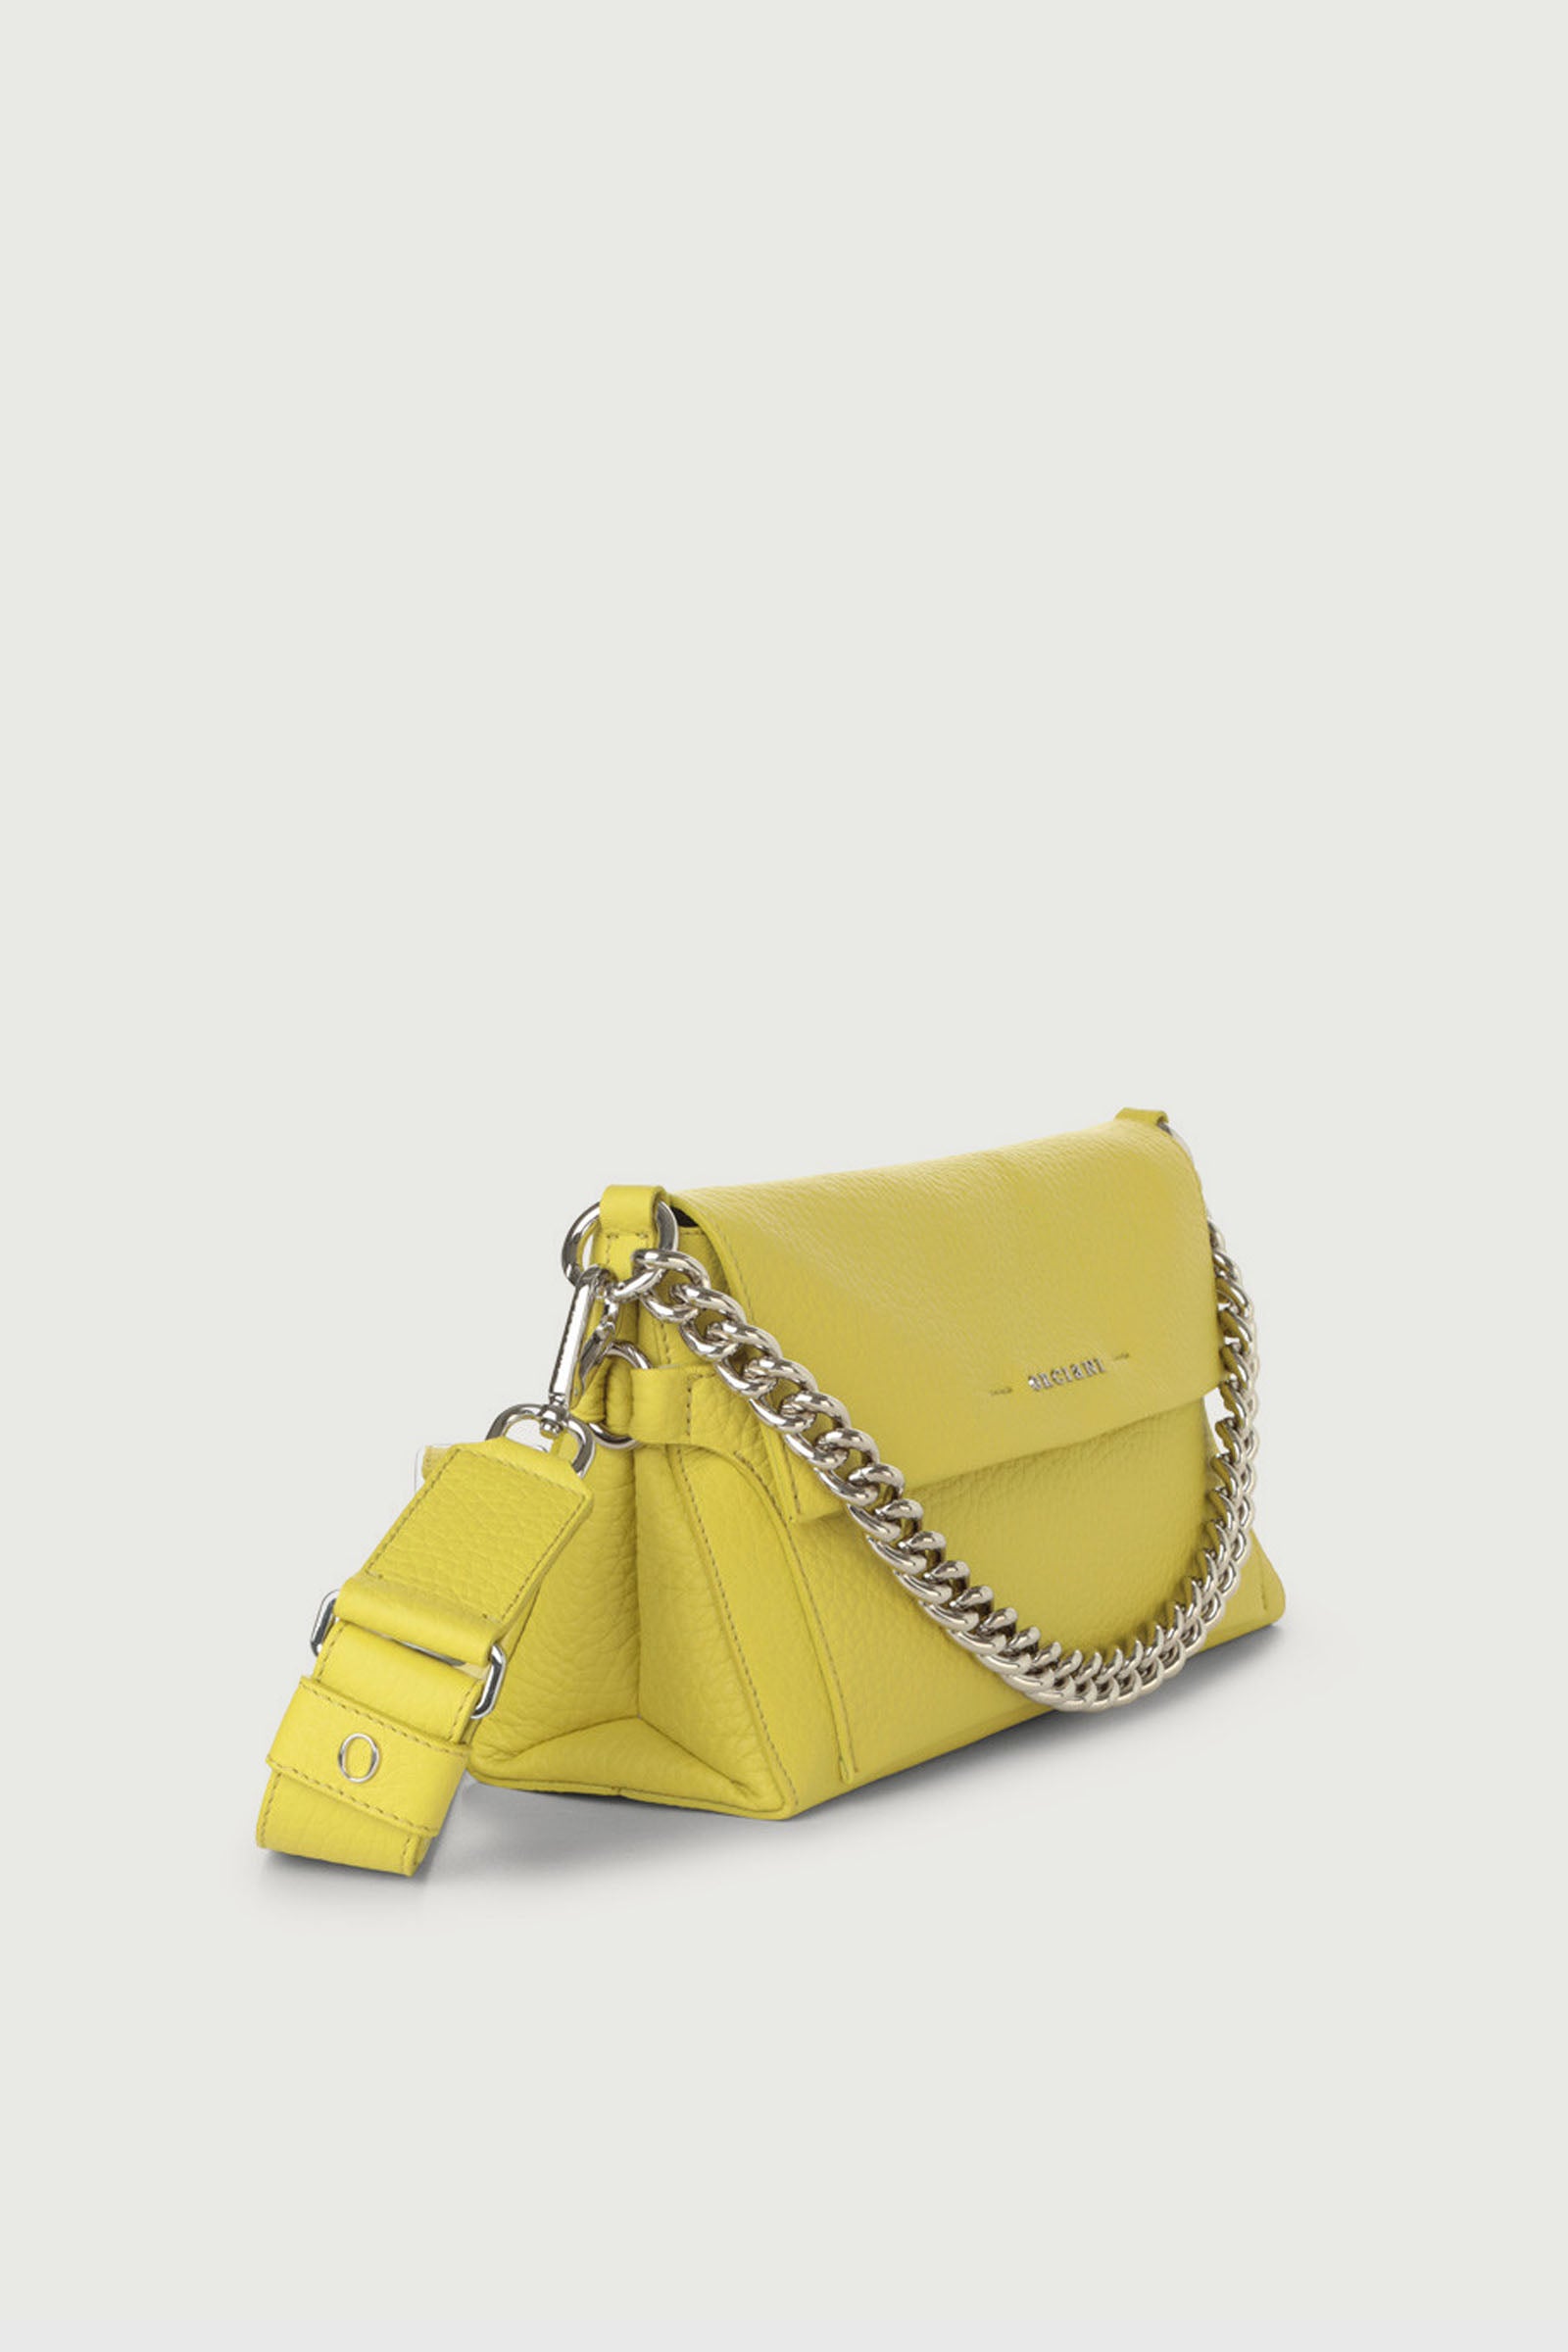 Orciani Shoulder Bag Missy Longuette Soft in Yellow Leather - 2